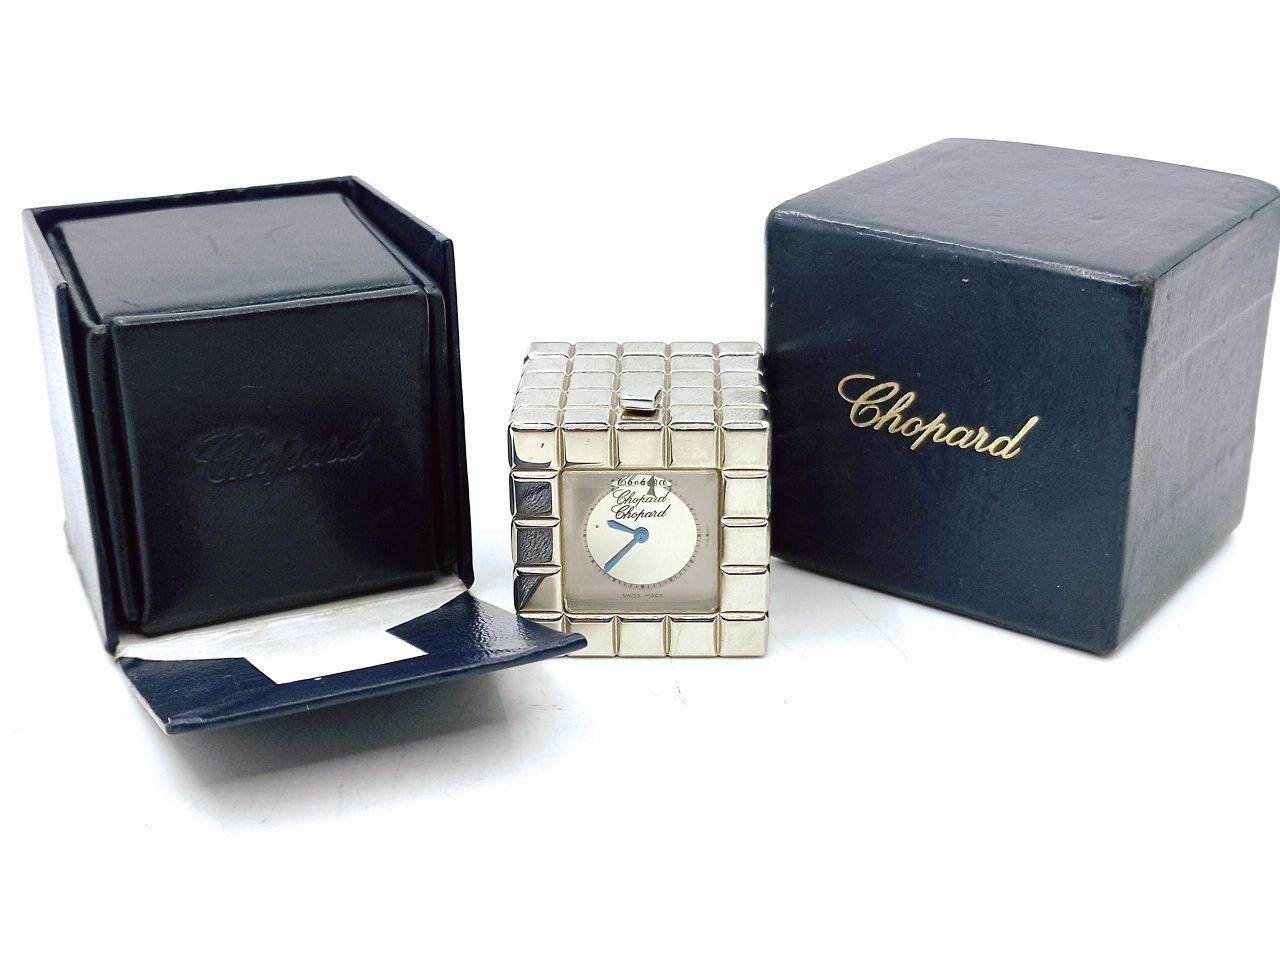 CHOPARD ICE CUBE TRAVEL WATCH AND ALARM